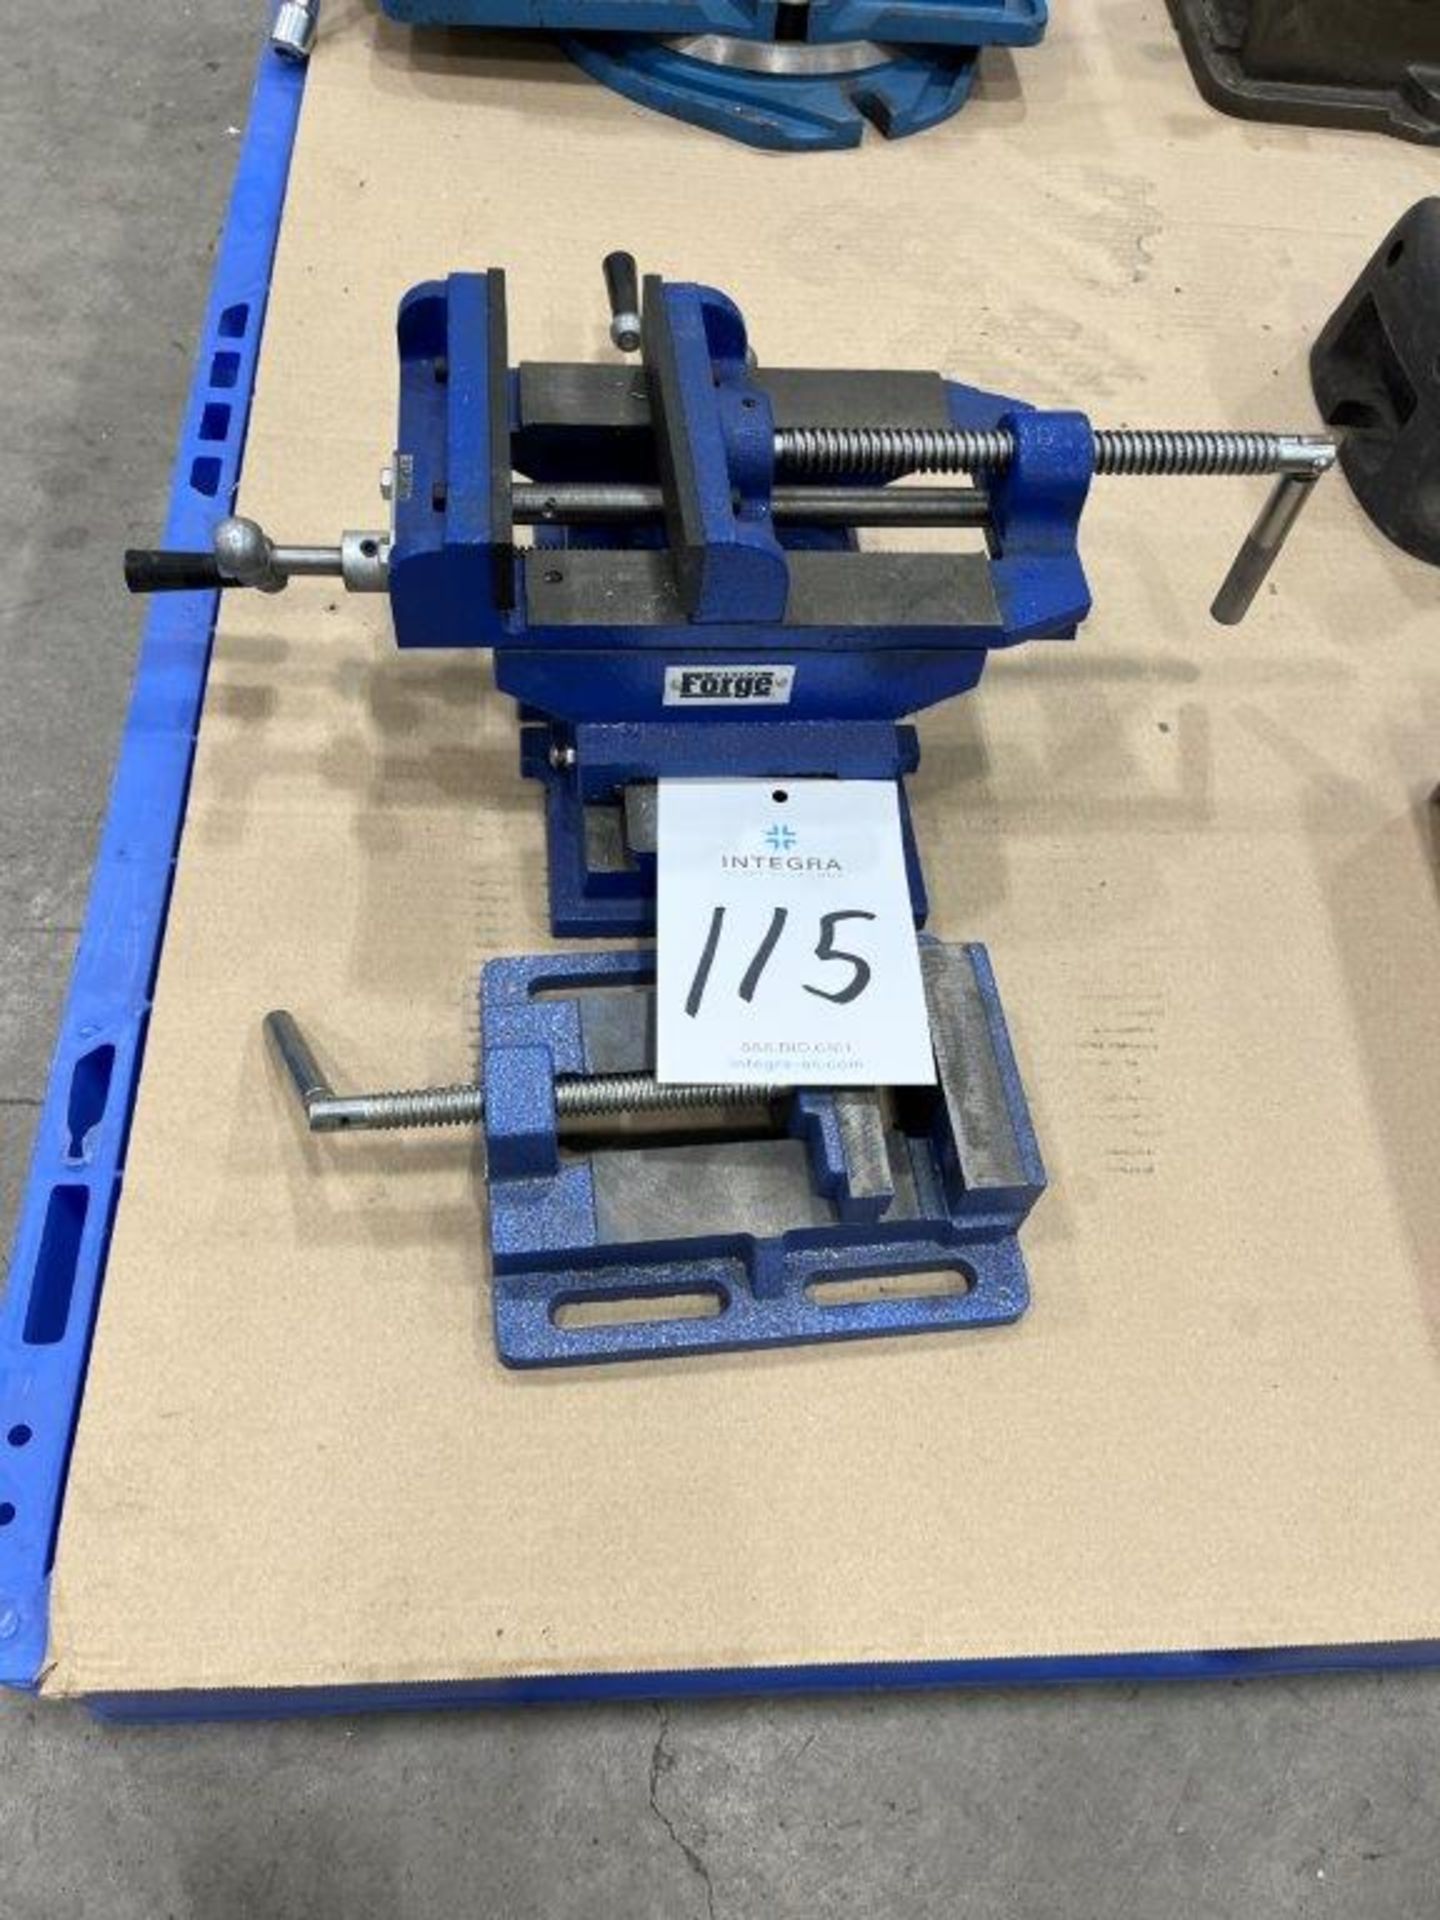 Forge Dual Action 6" Machine Vise